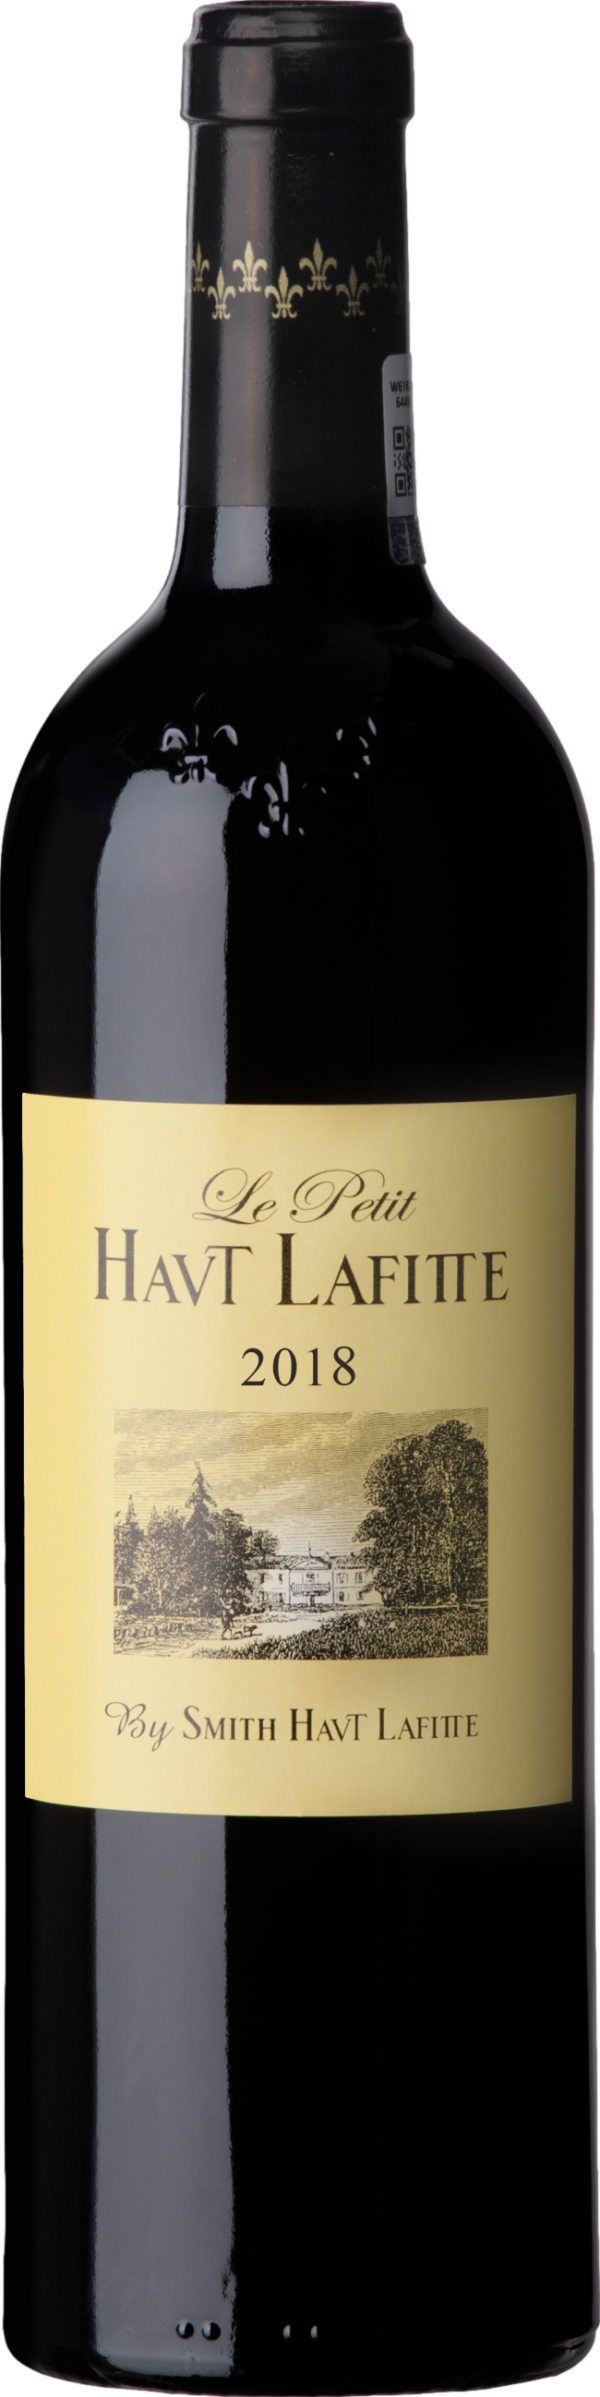 Product image of Chateau Smith Haut Lafitte Le Petit Haut Lafitte 2018 from 8wines